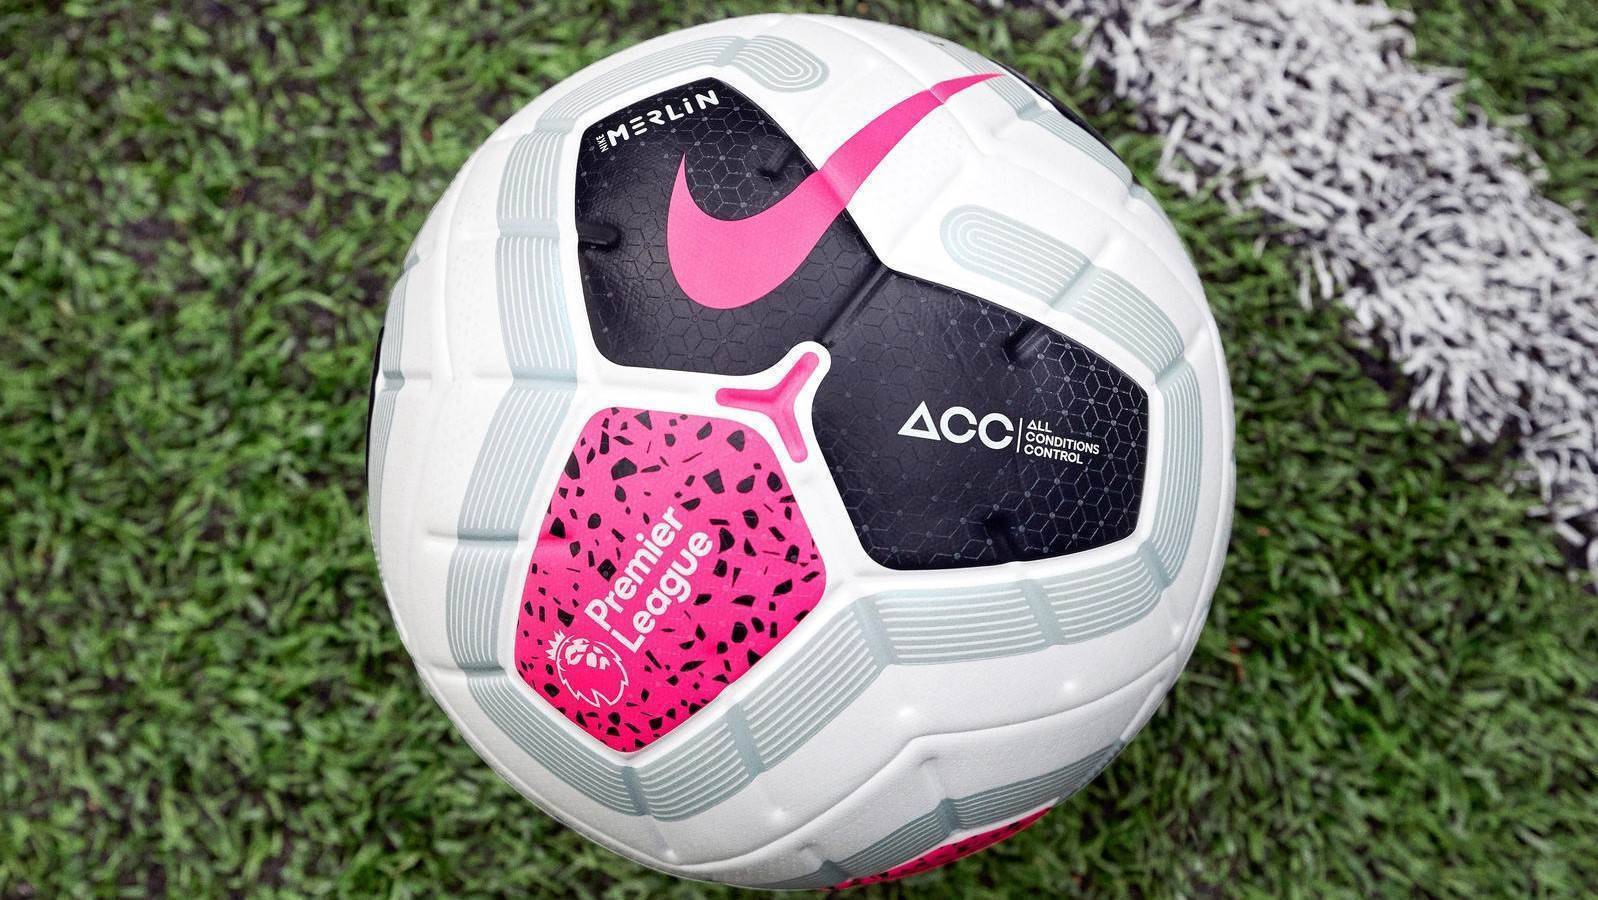 Nike Merlin unveiled as the official match ball for the 2019/20 Premier League - FTBL | The home of football in Australia